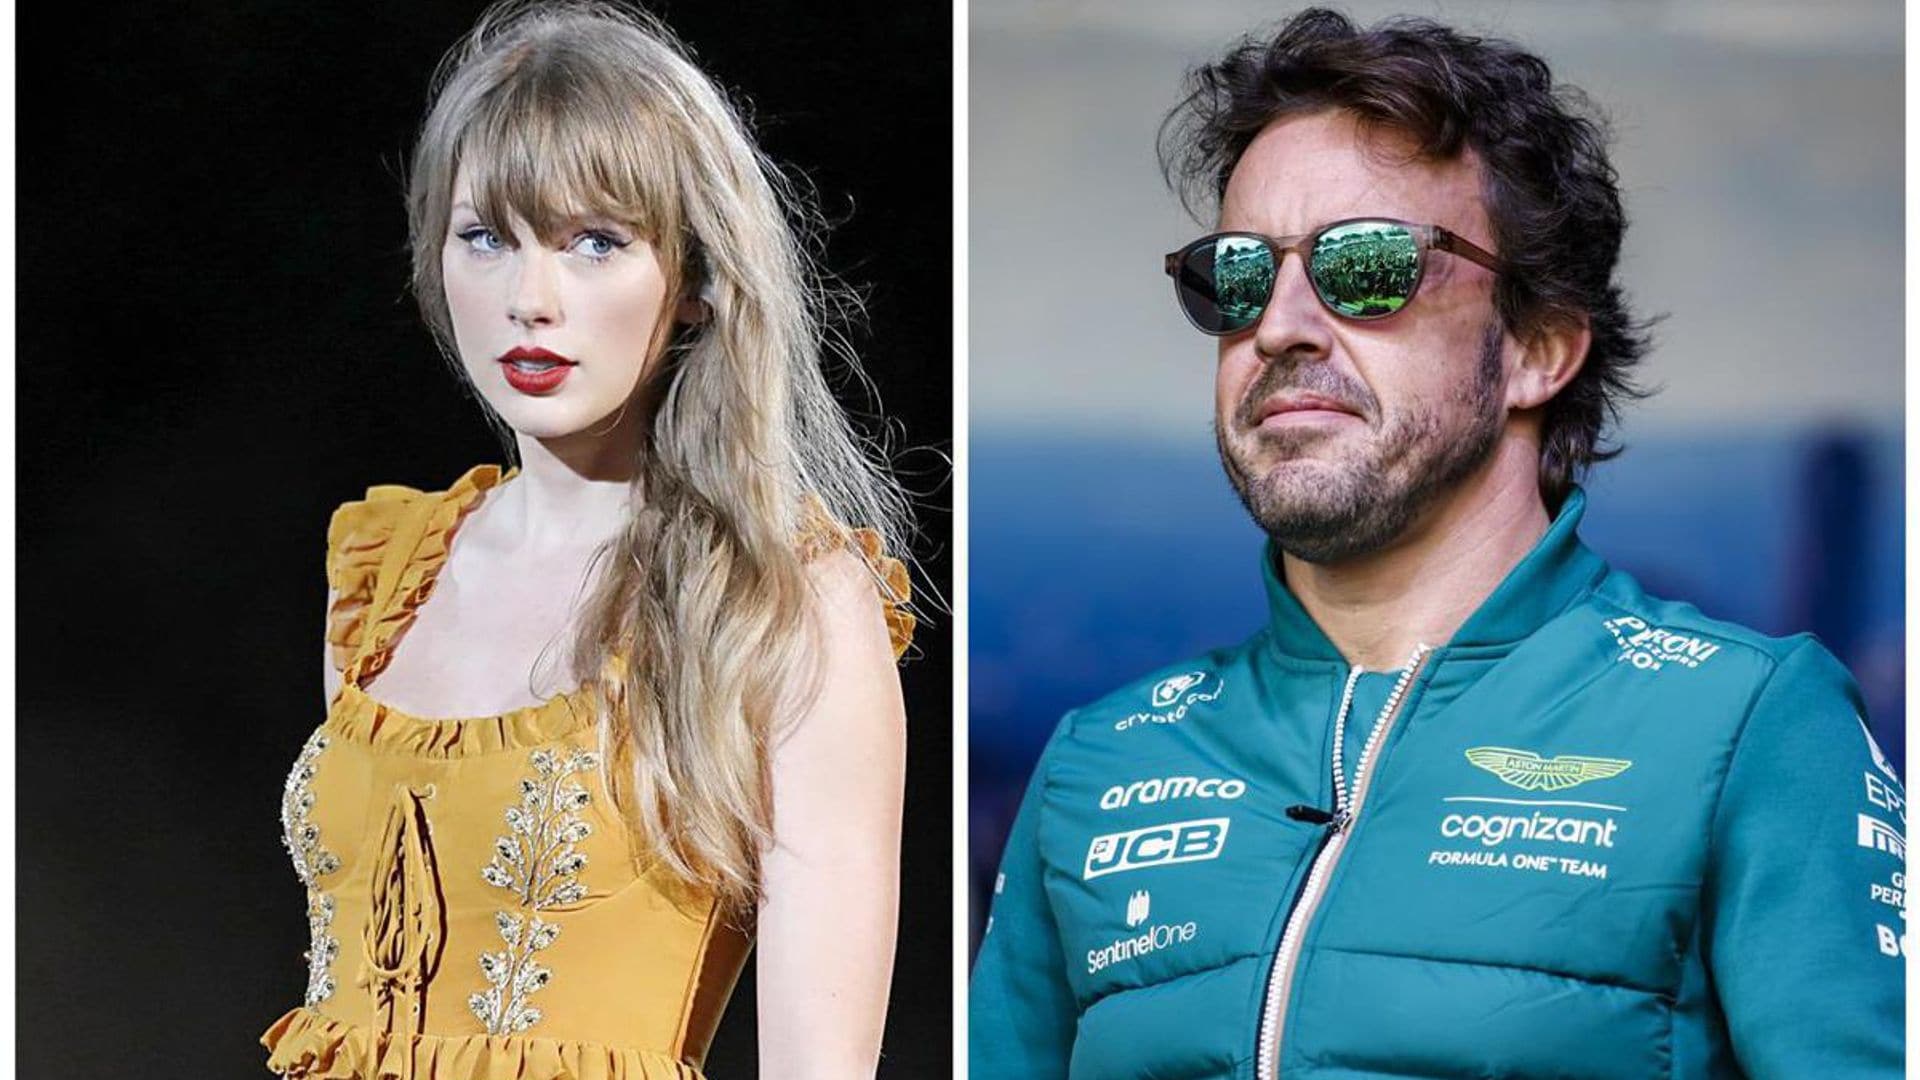 Formula 1 Fernando Alonso reacts to Taylor Swift dating rumors